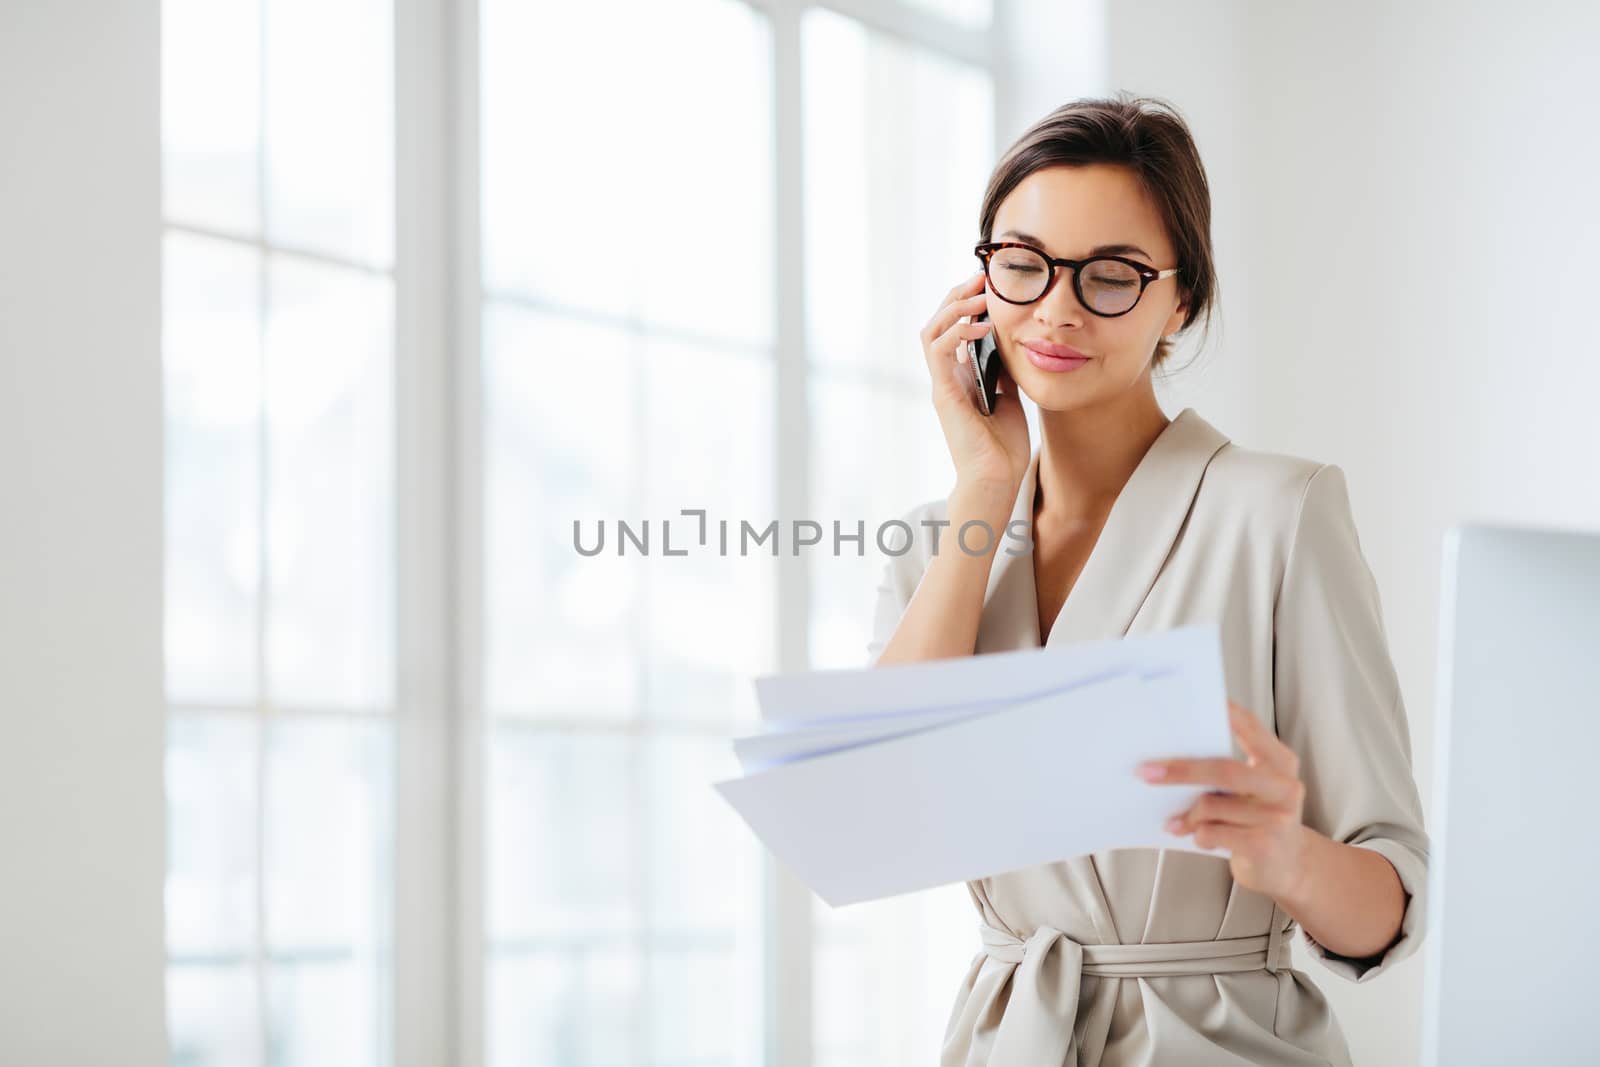 Horizontal shot of business lady discusses details of contract, works in office, concentrated on information from accountings, holds paper documents during telephone conversation, dressed formally by vkstock